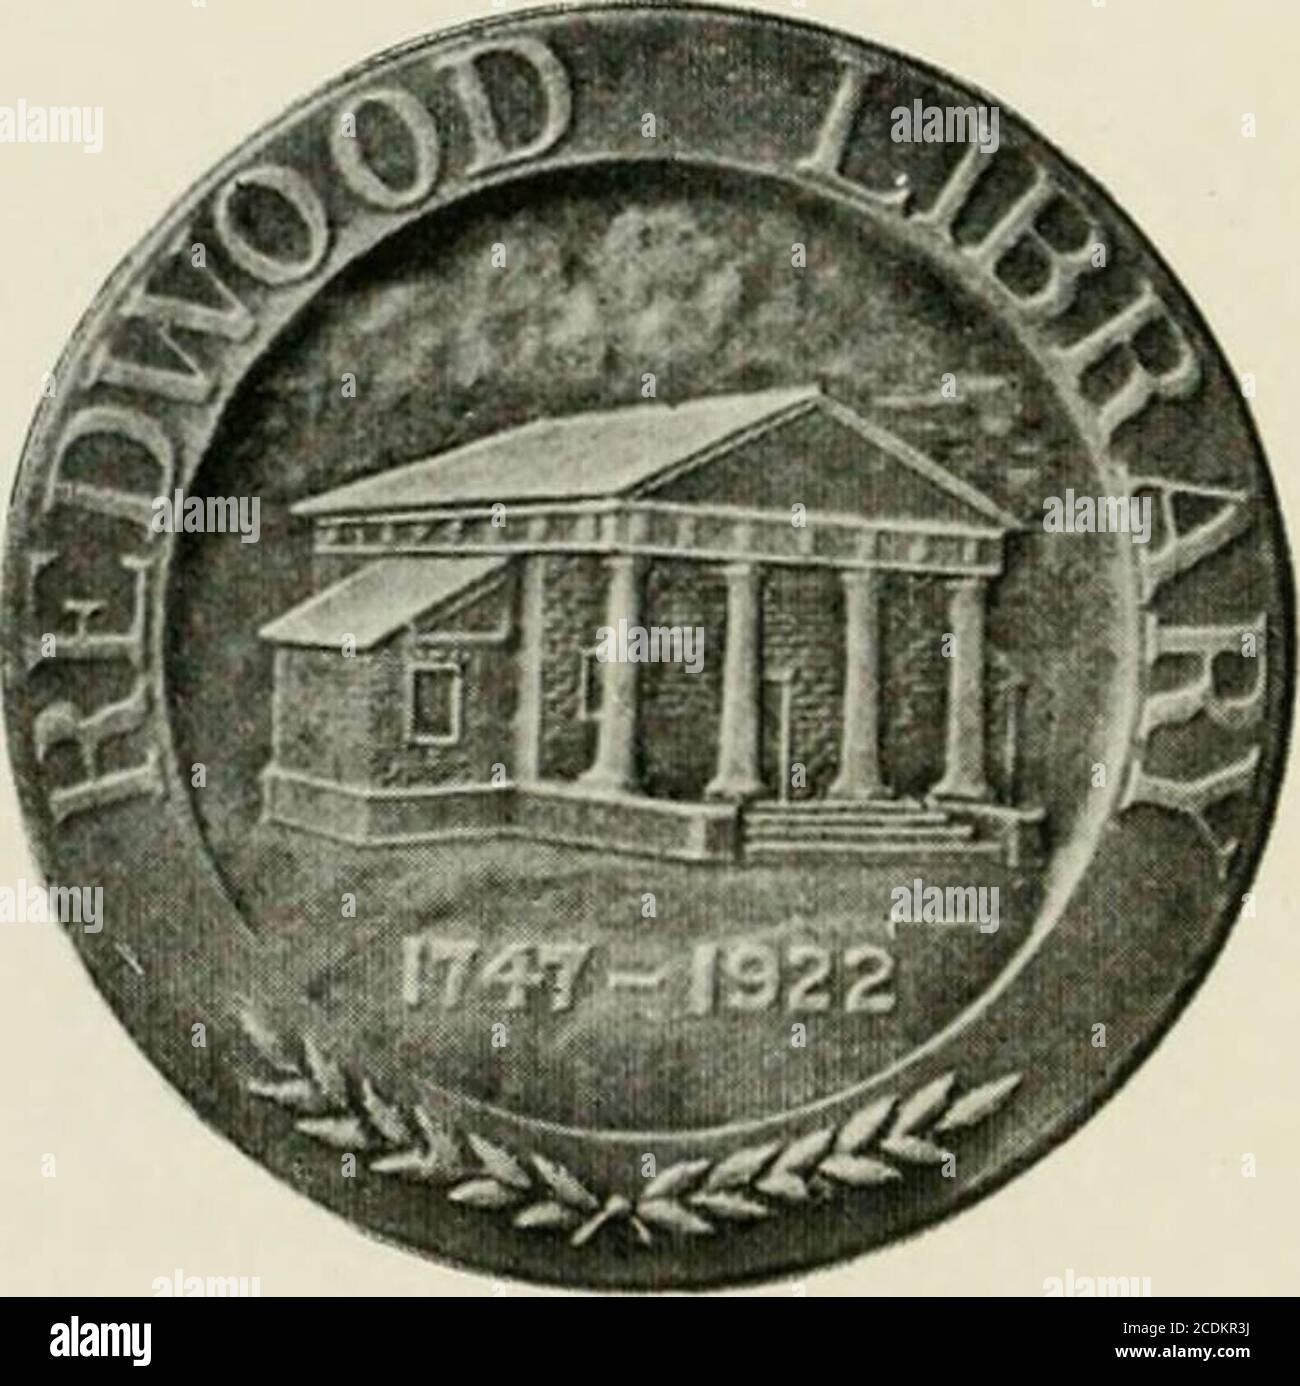 . One hundred and seventy-fifth anniversary of the incorporation of the Redwood library . Hinckley Mr. and Mrs. Arthur Curtiss James Mr. and Mrs. Lewis Cass Ledyard Miss Rosa Anne Grosvenor Miss Ellen F. Mason Dr. and Mrs. Alexander H. Rice Mrs. Hugh D. Auchincloss Mr. and Mrs. William Gammell Mr. John Nicholas Brown Mrs. Vanderbilt Dr. and Mrs. William C. Rives Miss Anna F. Hunter Mrs. J. Peace Vernon Miss Mary E. Powel Ex-Governor R. Livingston Beeckman Ex- Governor and Mrs. Charles S. Whitman Mayor and Mrs. J. P. Mahoney Judge and Mrs. Hugh Baker Judge and Mrs. Max Levy Rear Admiral and Mrs Stock Photo